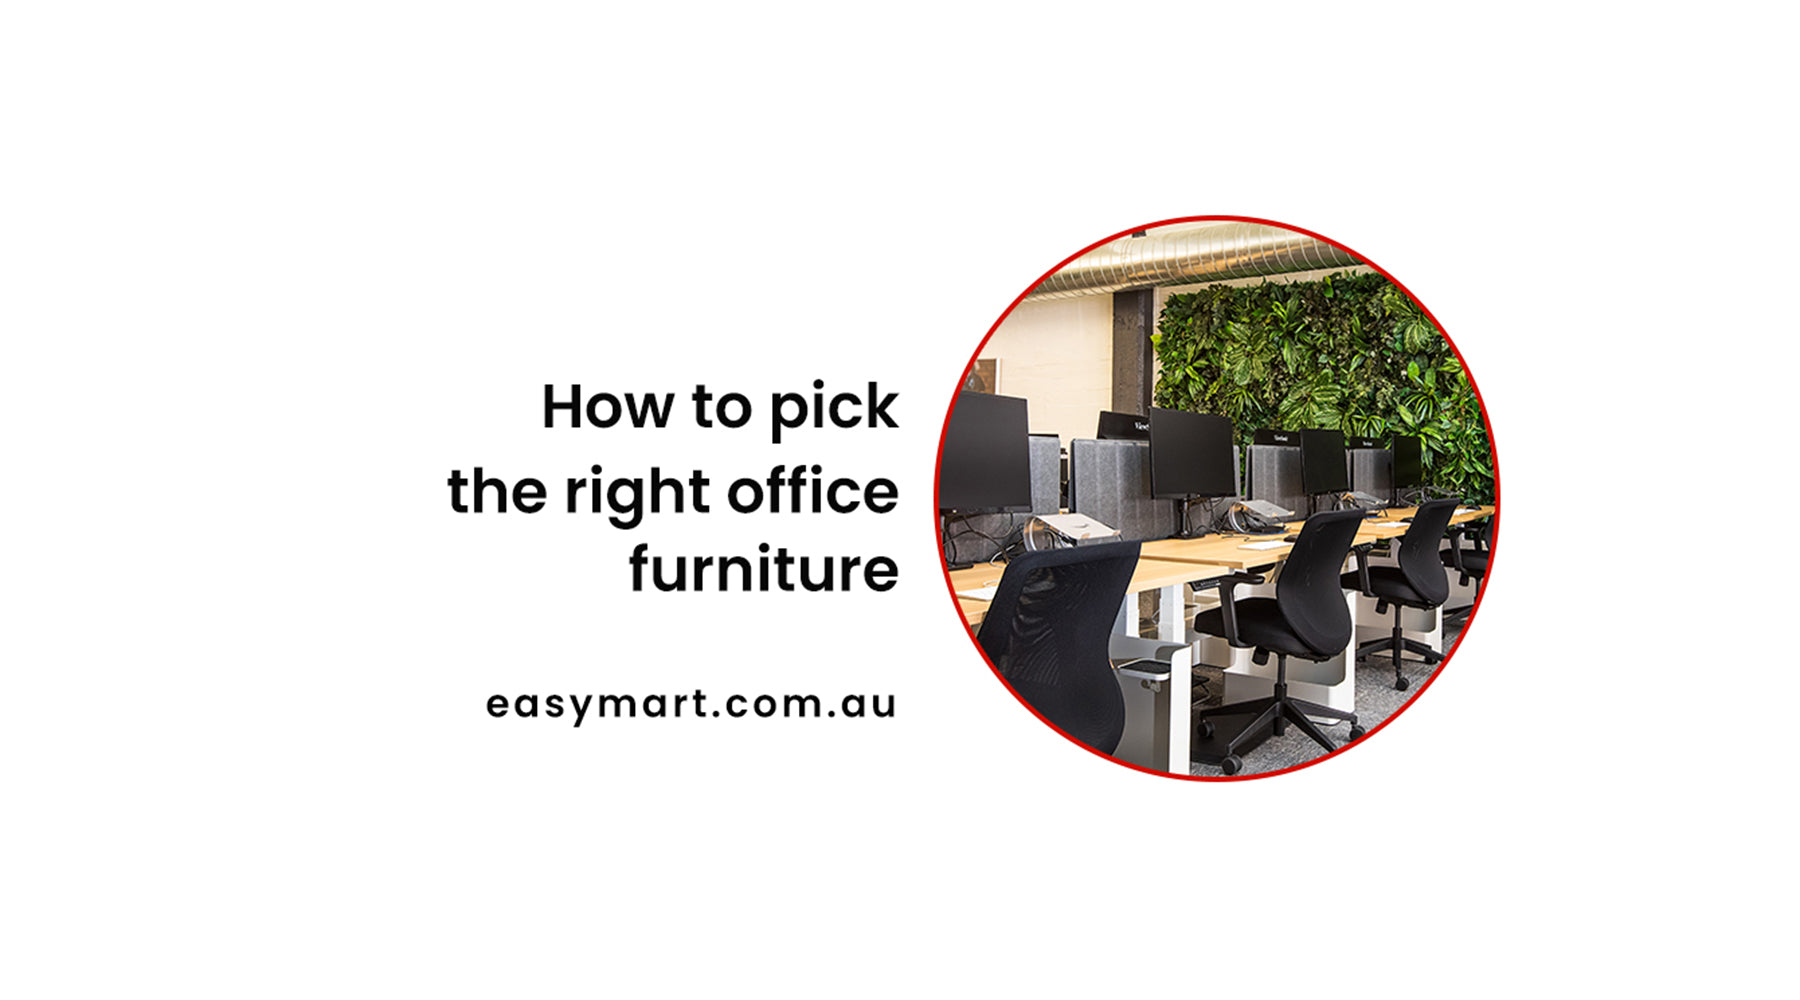 How to pick the right office furniture- All you need to know